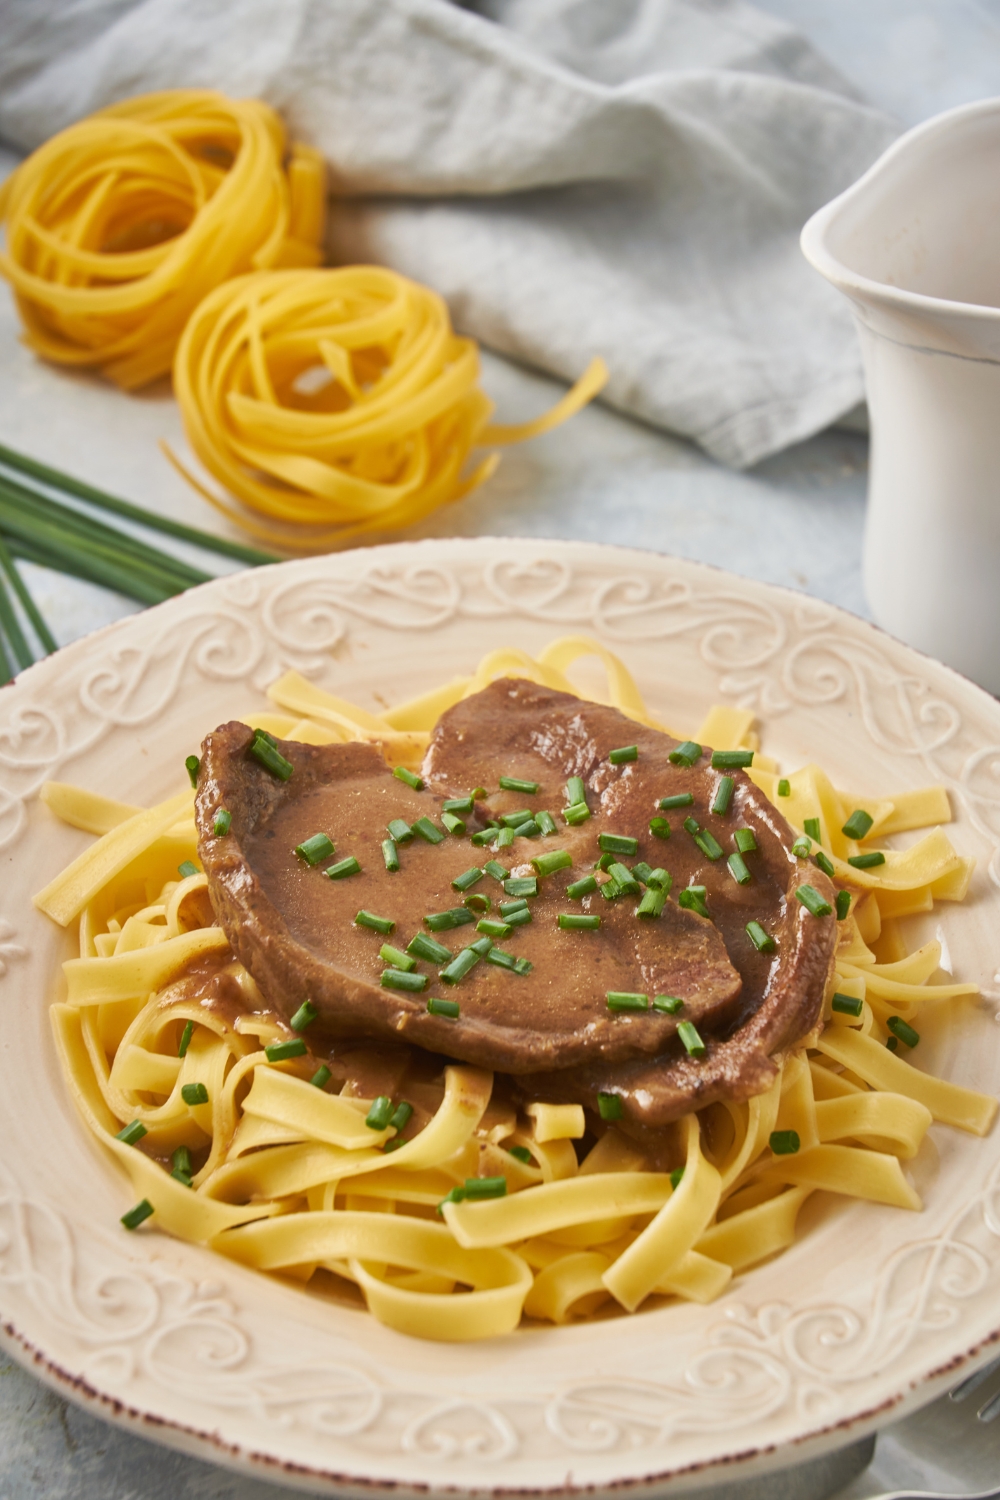 A cube steak covered in brown gravy garnished with sliced green onion and served on a bed of linguini noodles.